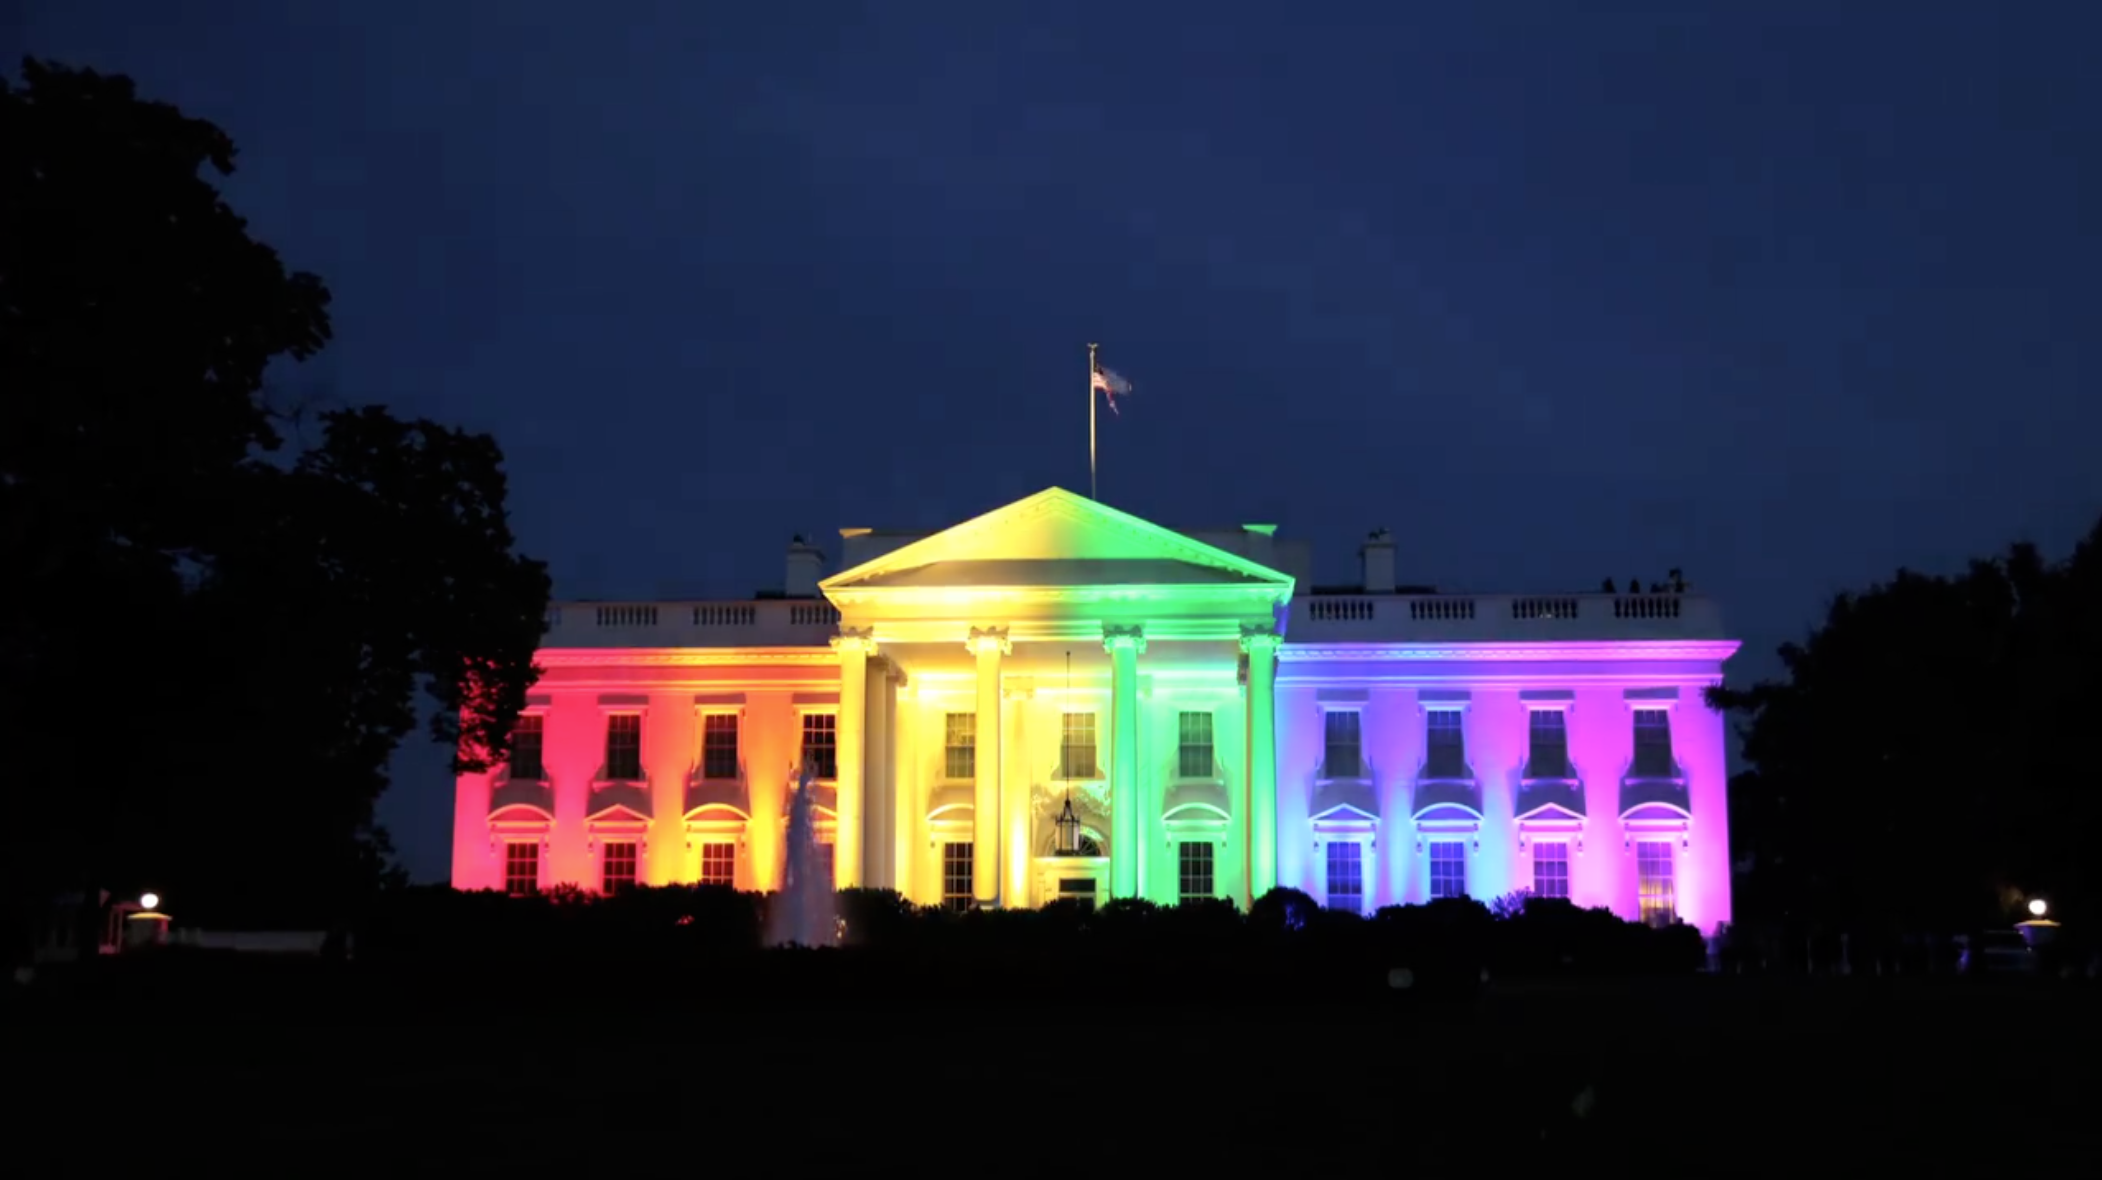 The White House is decorated in Rainbow lights.